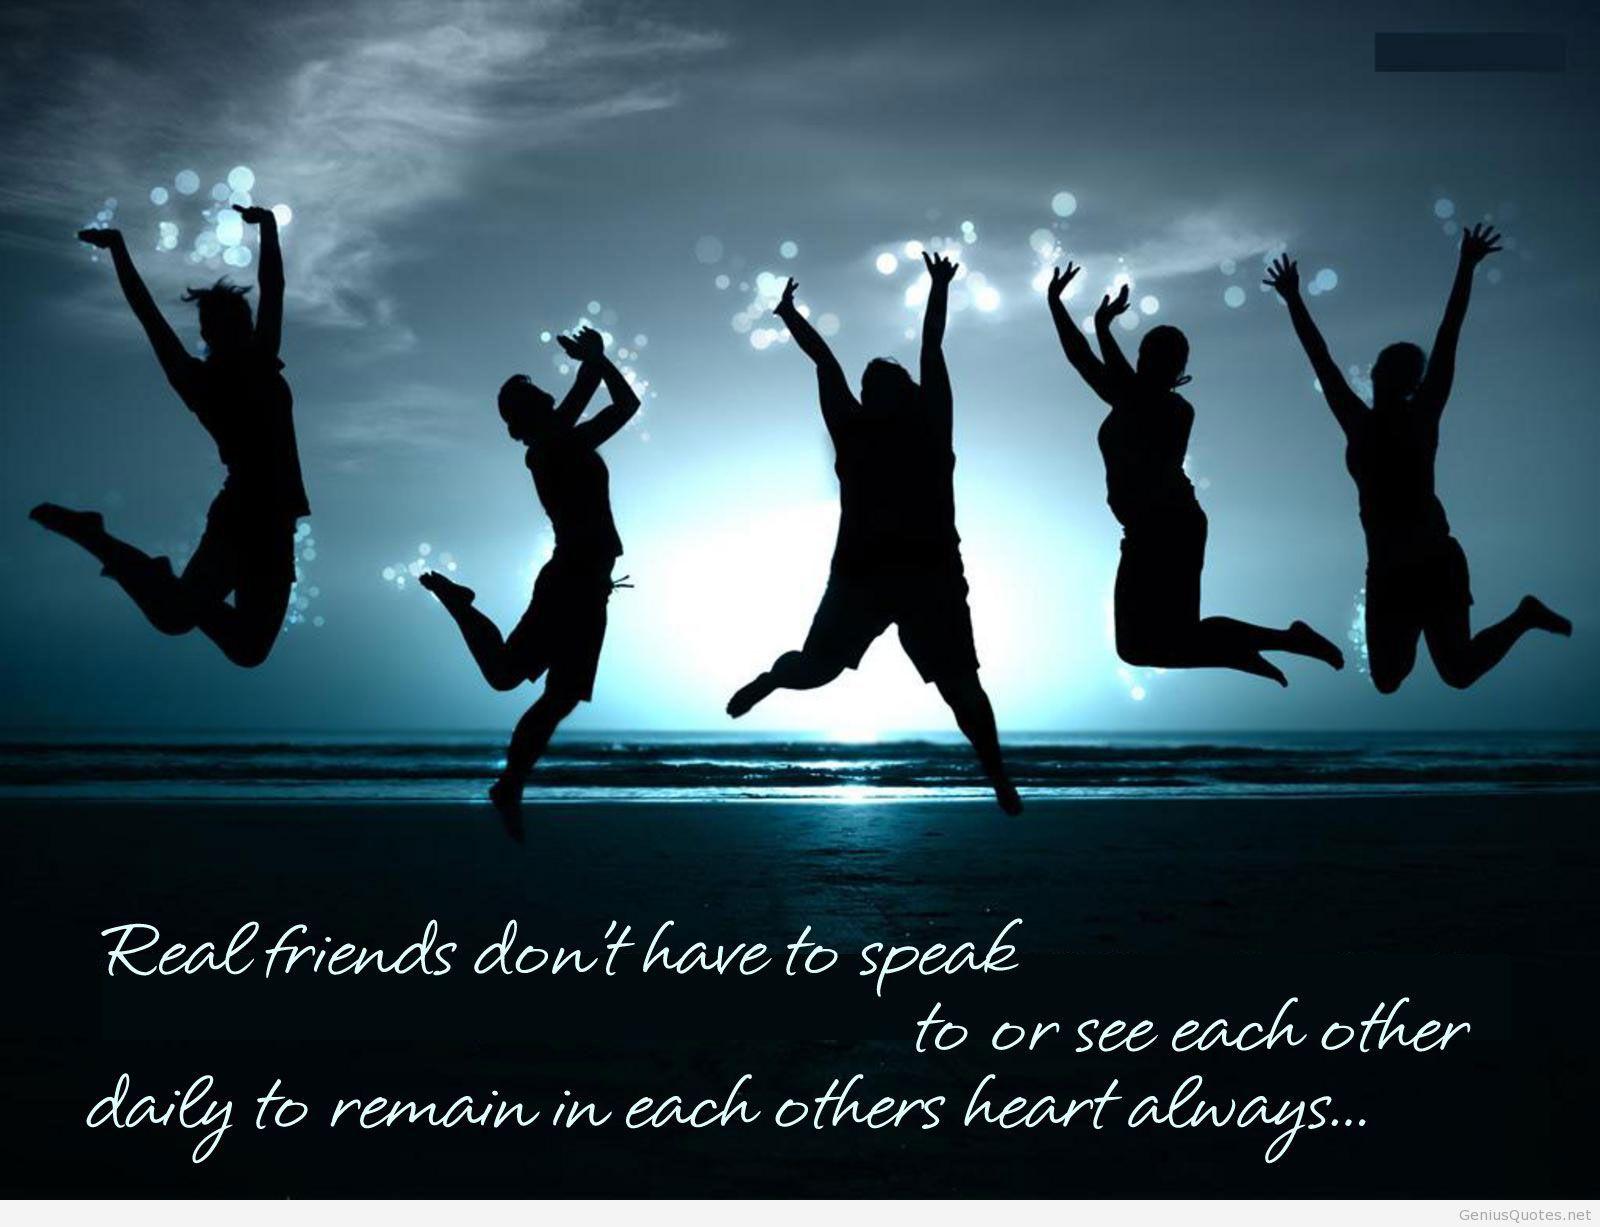 Best Quotes About Friendship With Image Best Friends Forever Quotes